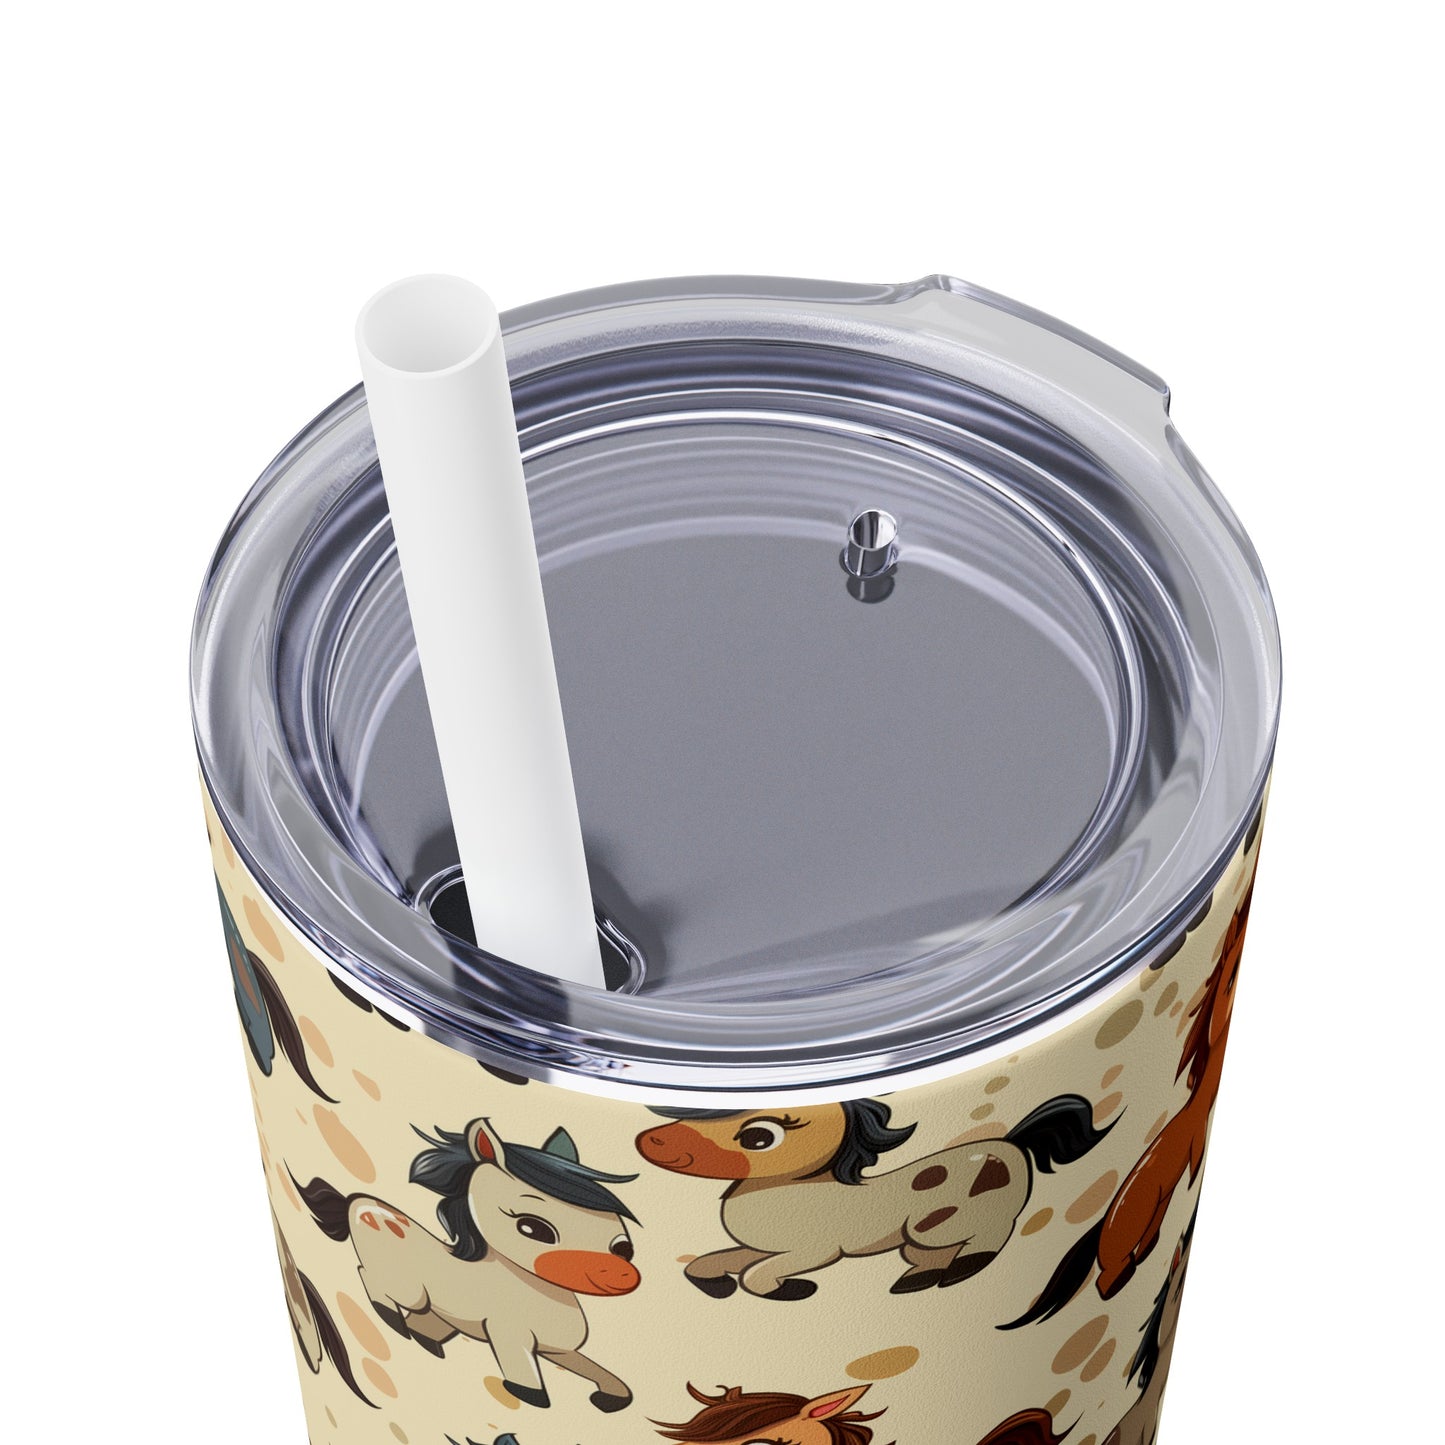 Insulated 20 oz Tumbler with Lid & Straw, Cute Baby Horses - Double-walled Stainless Steel, Keeps Drinks Hot or Cold